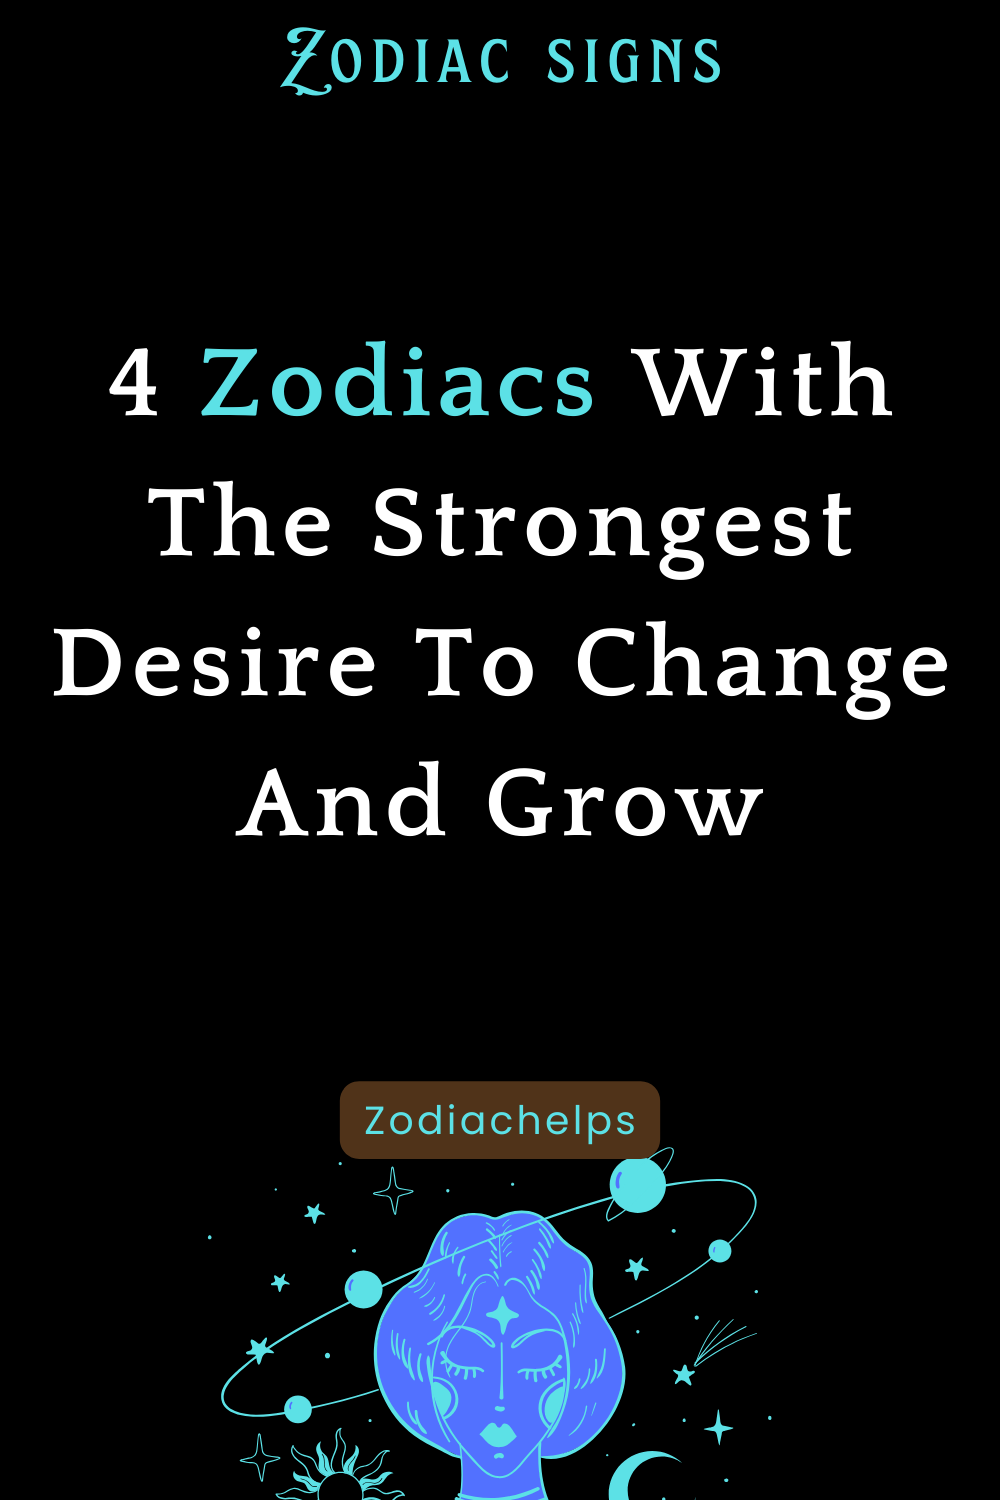 4 Zodiacs With The Strongest Desire To Change And Grow